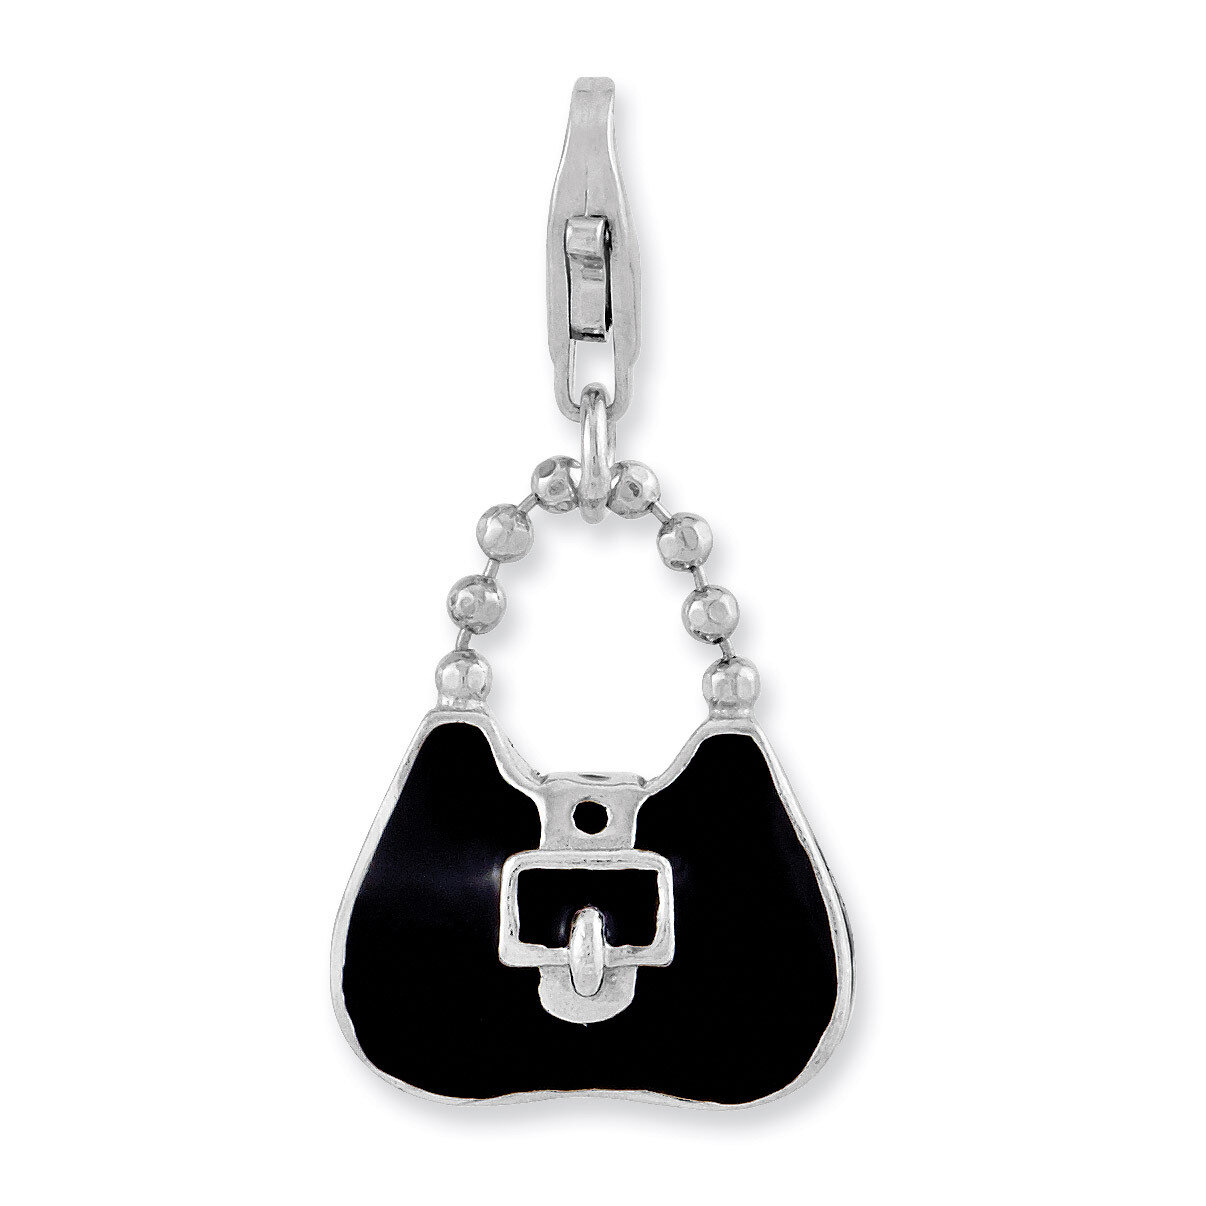 3-D Enameled Purse Charm Sterling Silver Rhodium Plated QCC937